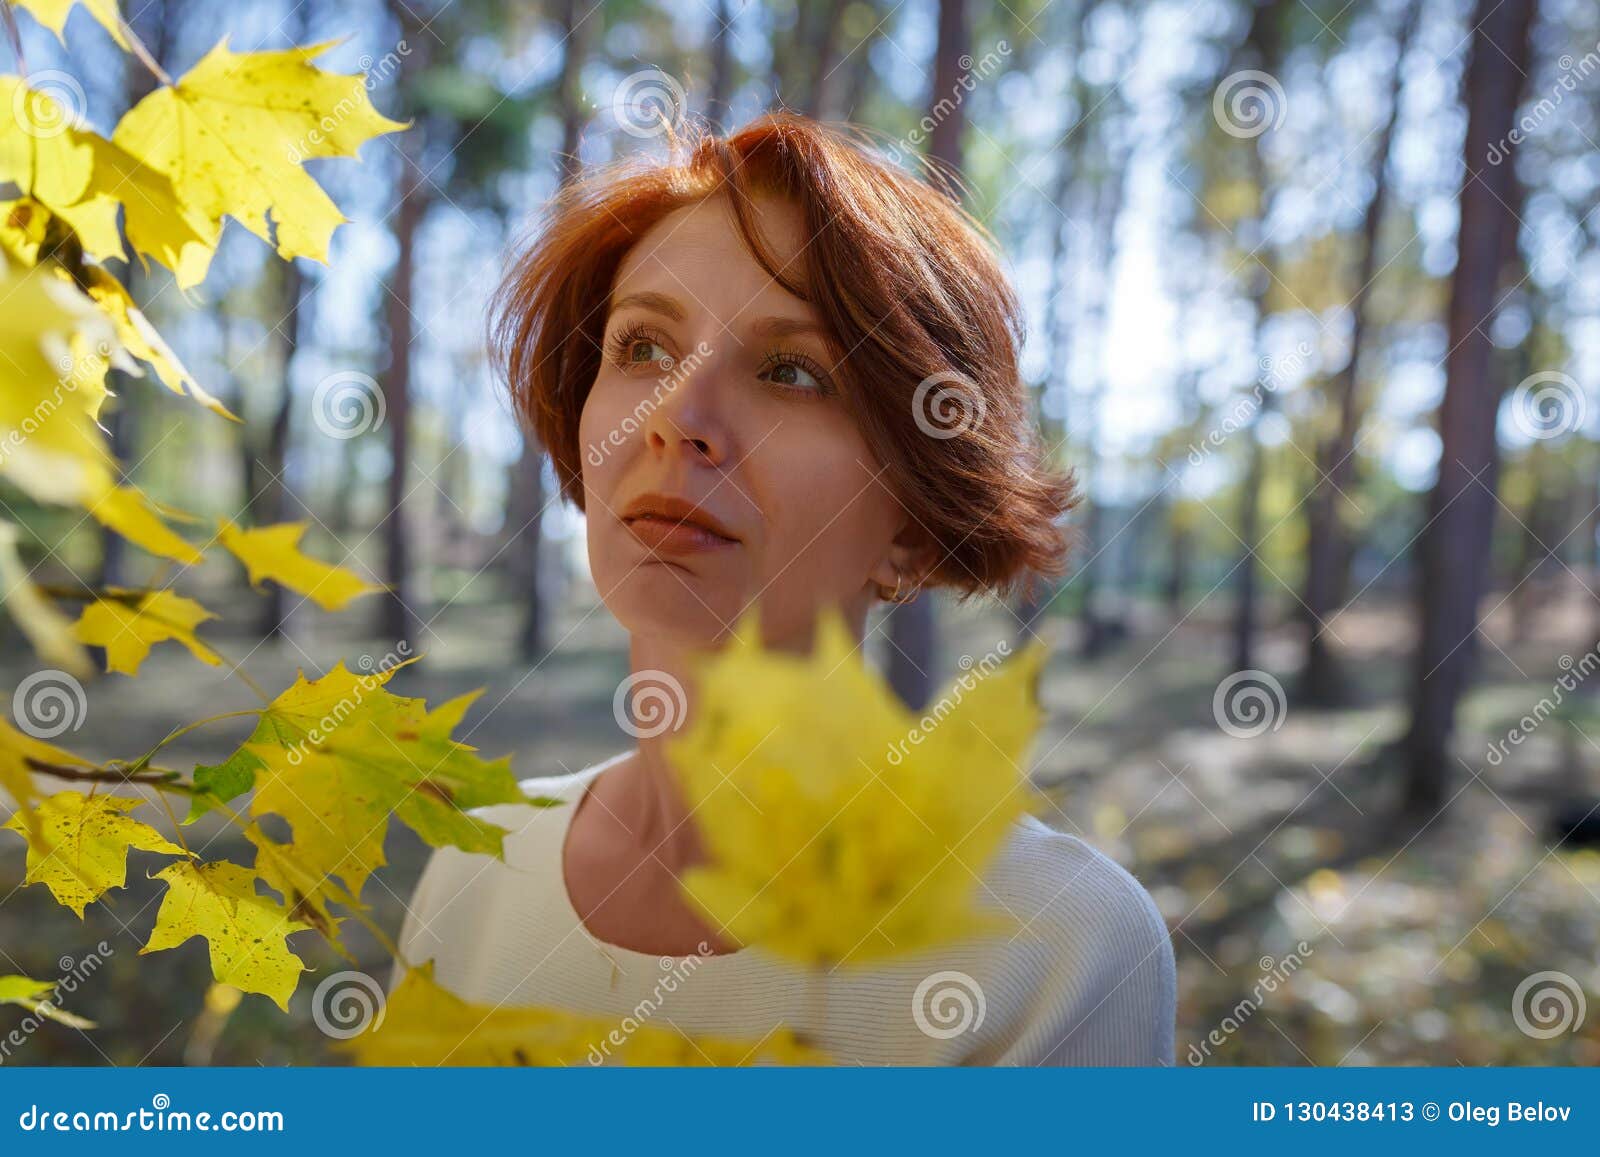 Girl with Brown Hair Stands Near Maple Branches with Yellow Leaves and ...